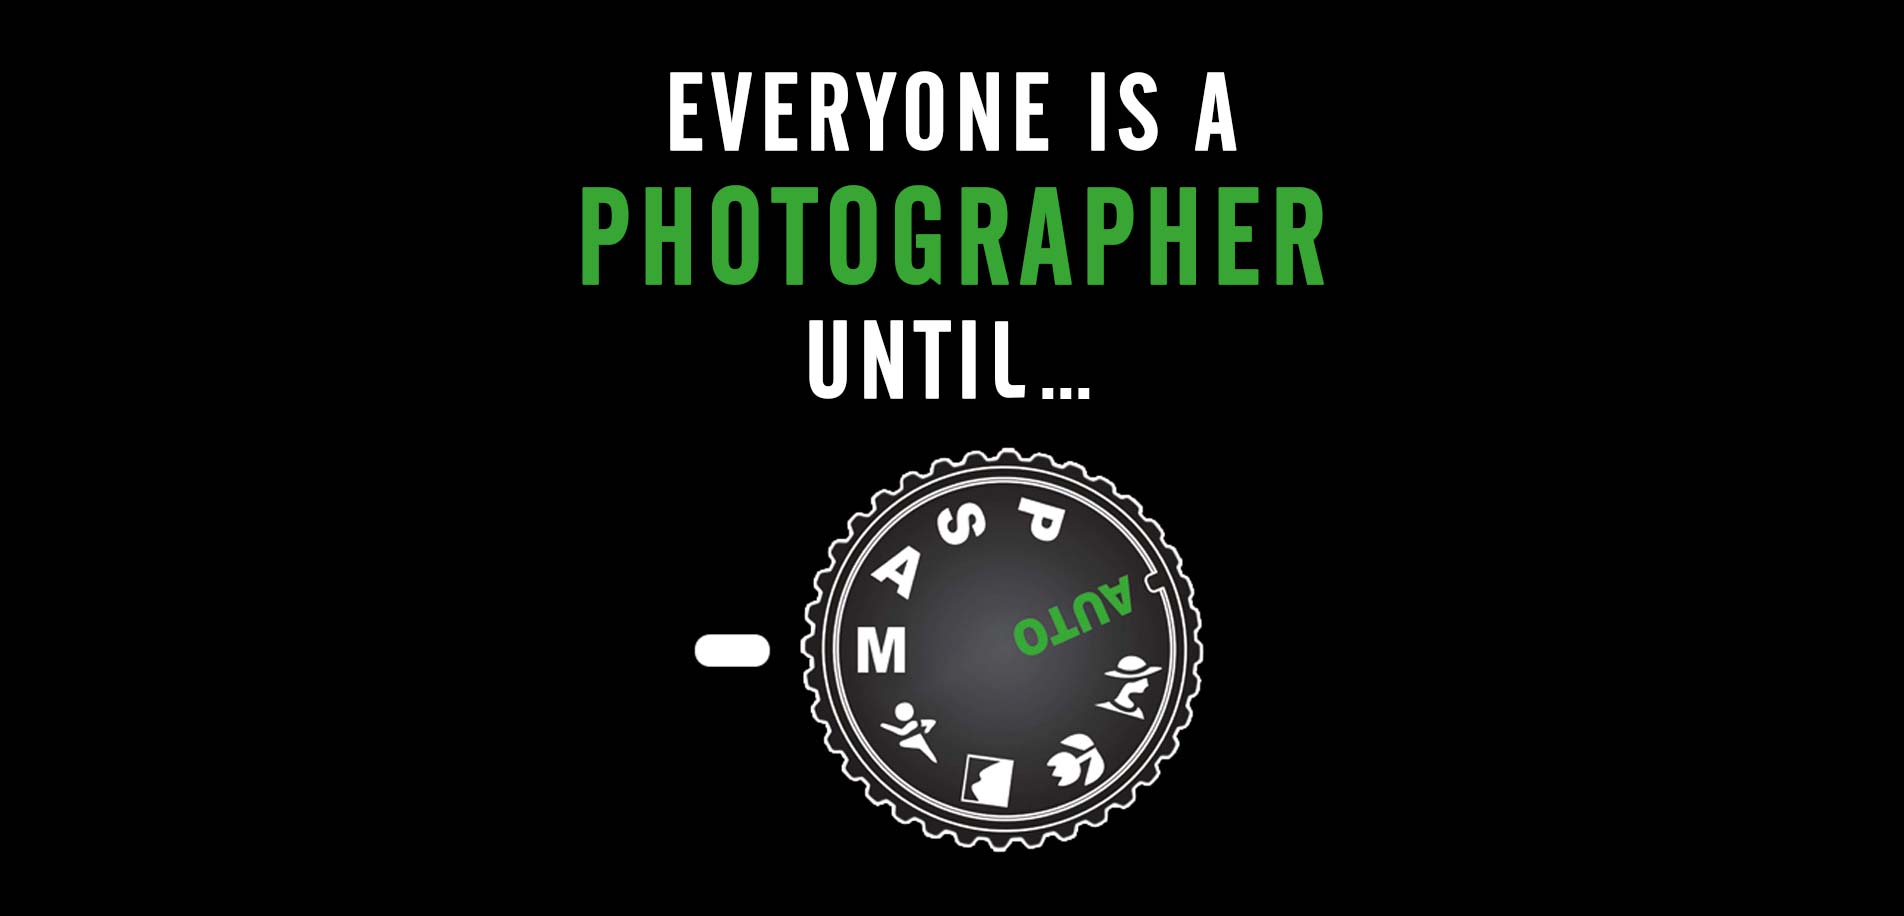 Everone is a Photograher...